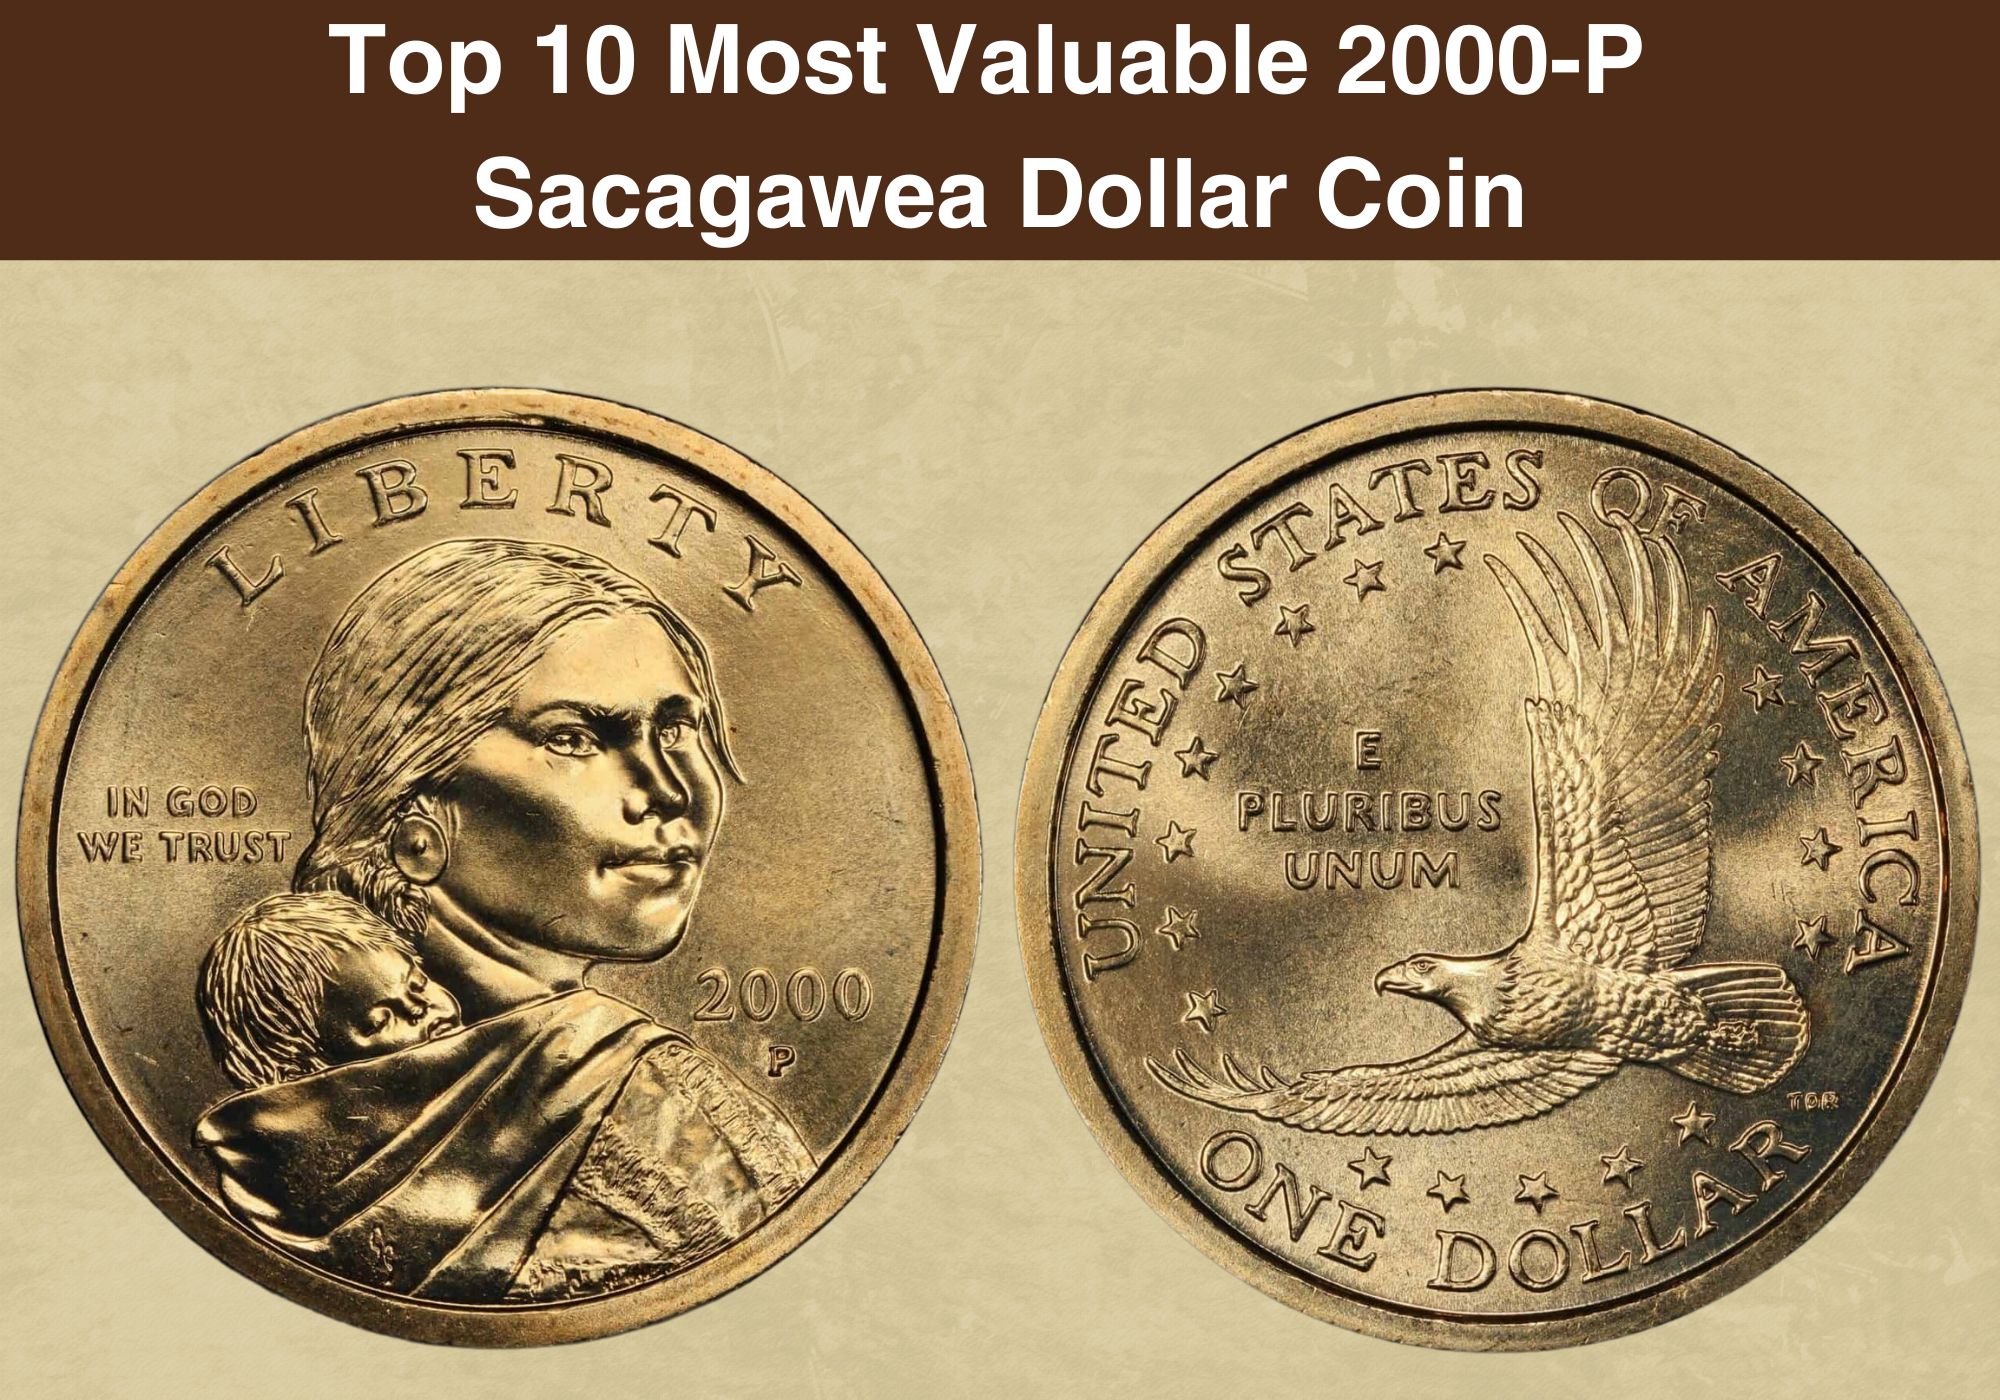 Top 10 Most Valuable 2000-P Sacagawea Dollar Coin